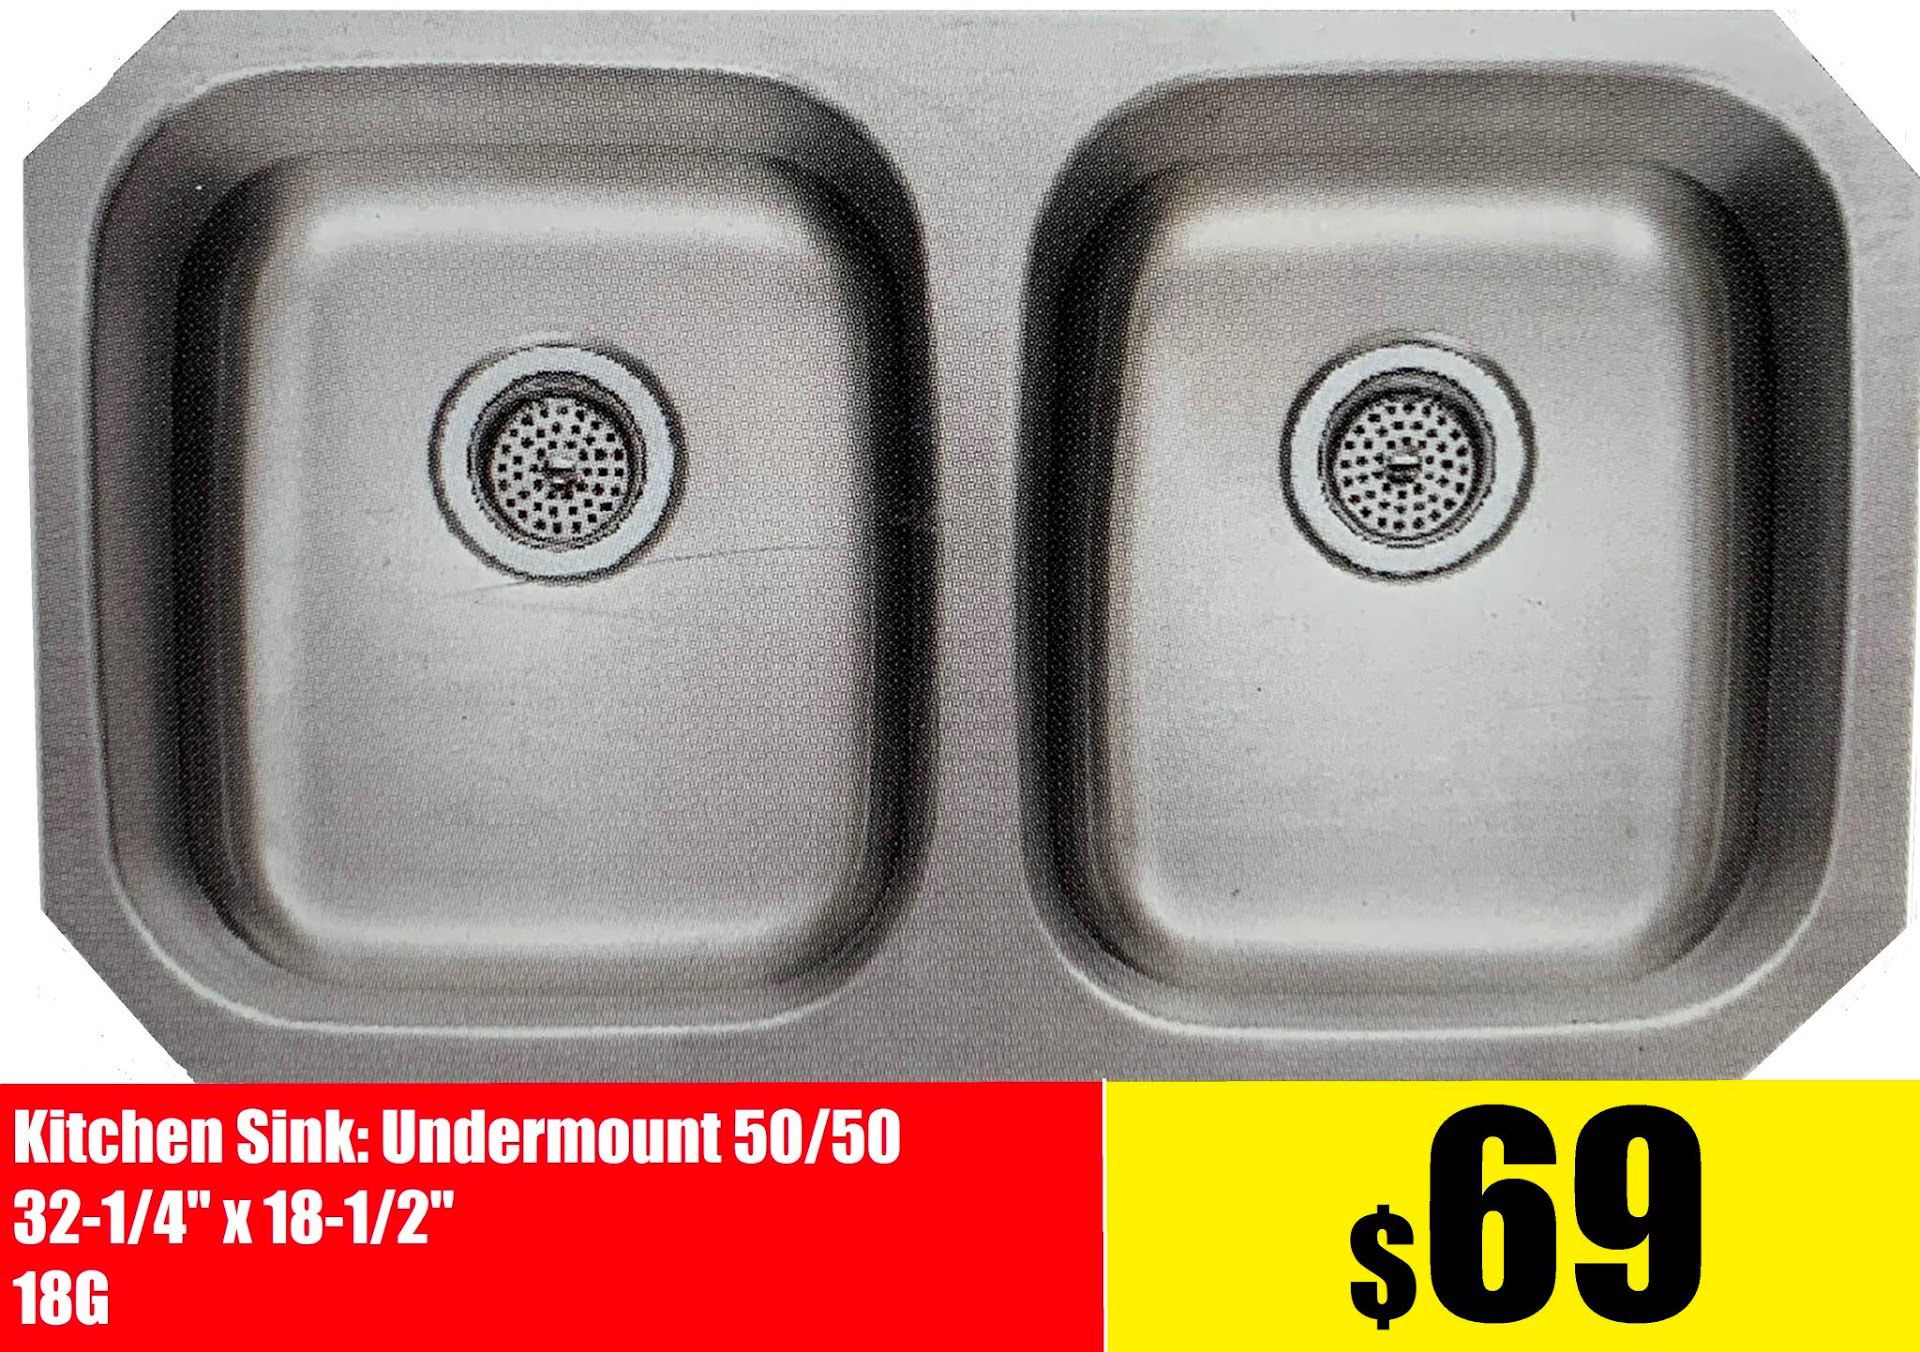 Stainless Steel Kitchen Cabinet Countertop Sink under Mount, Top Mount From $69